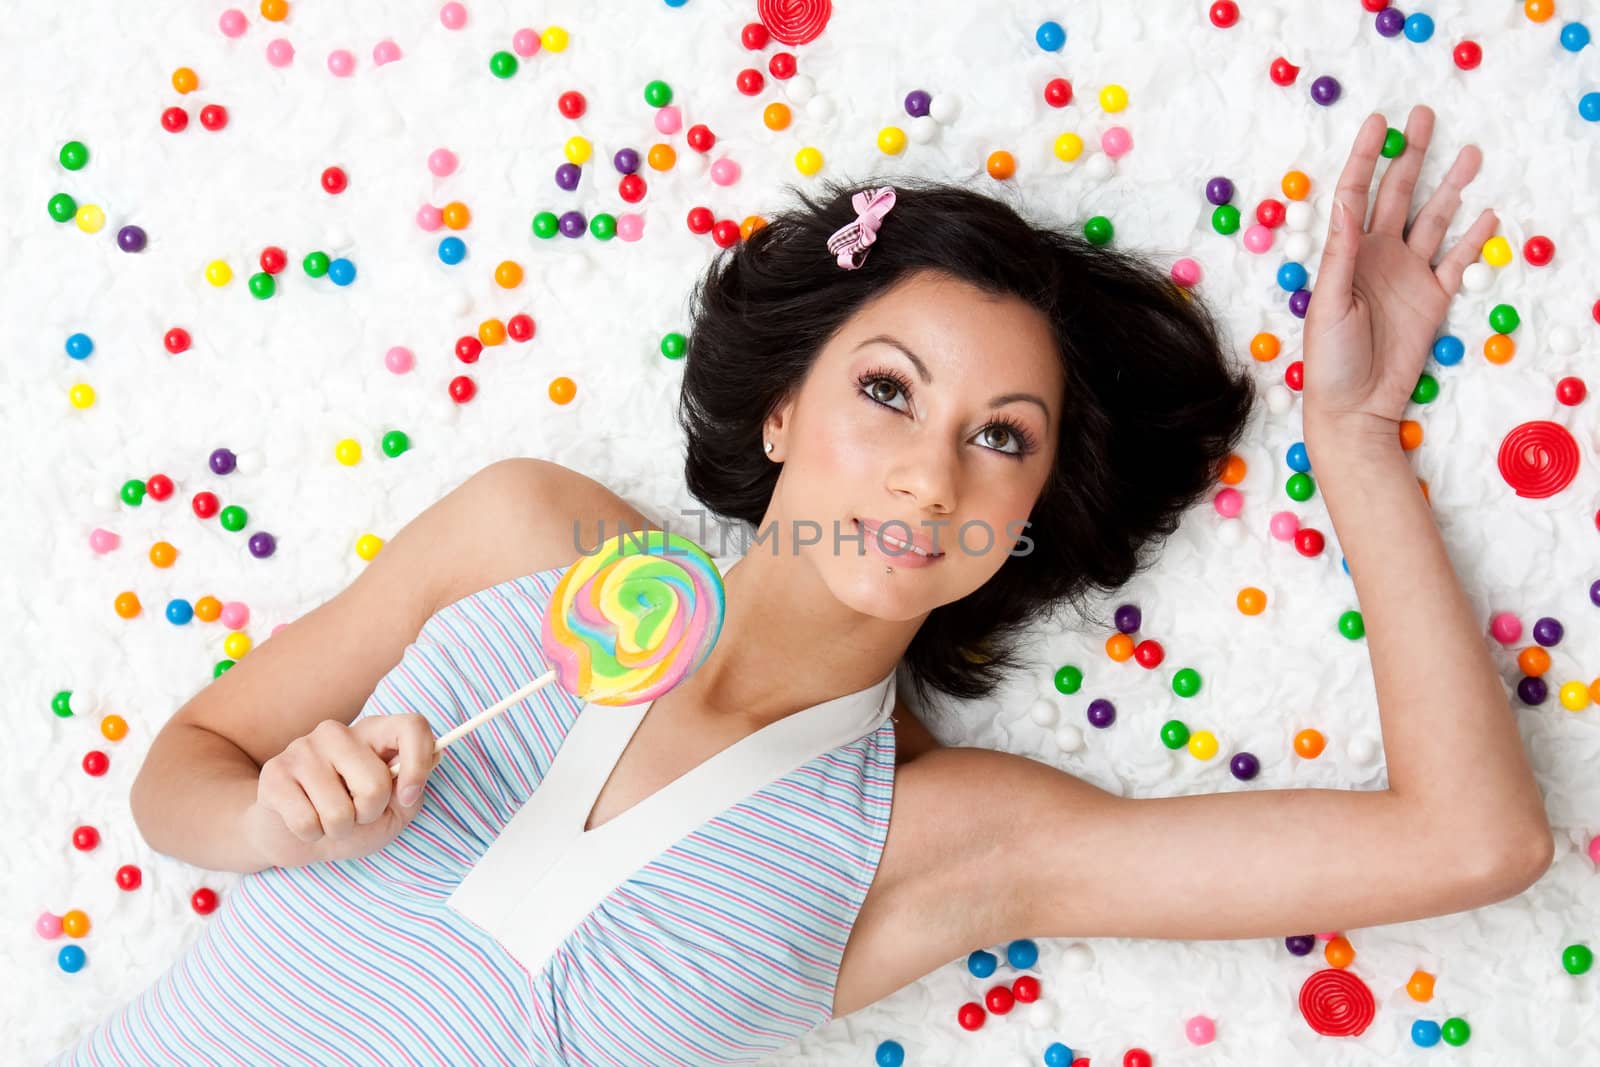 Young Latina woman laying on ruffled cloud like floor between colorful bubblegum balls holding a lollipop